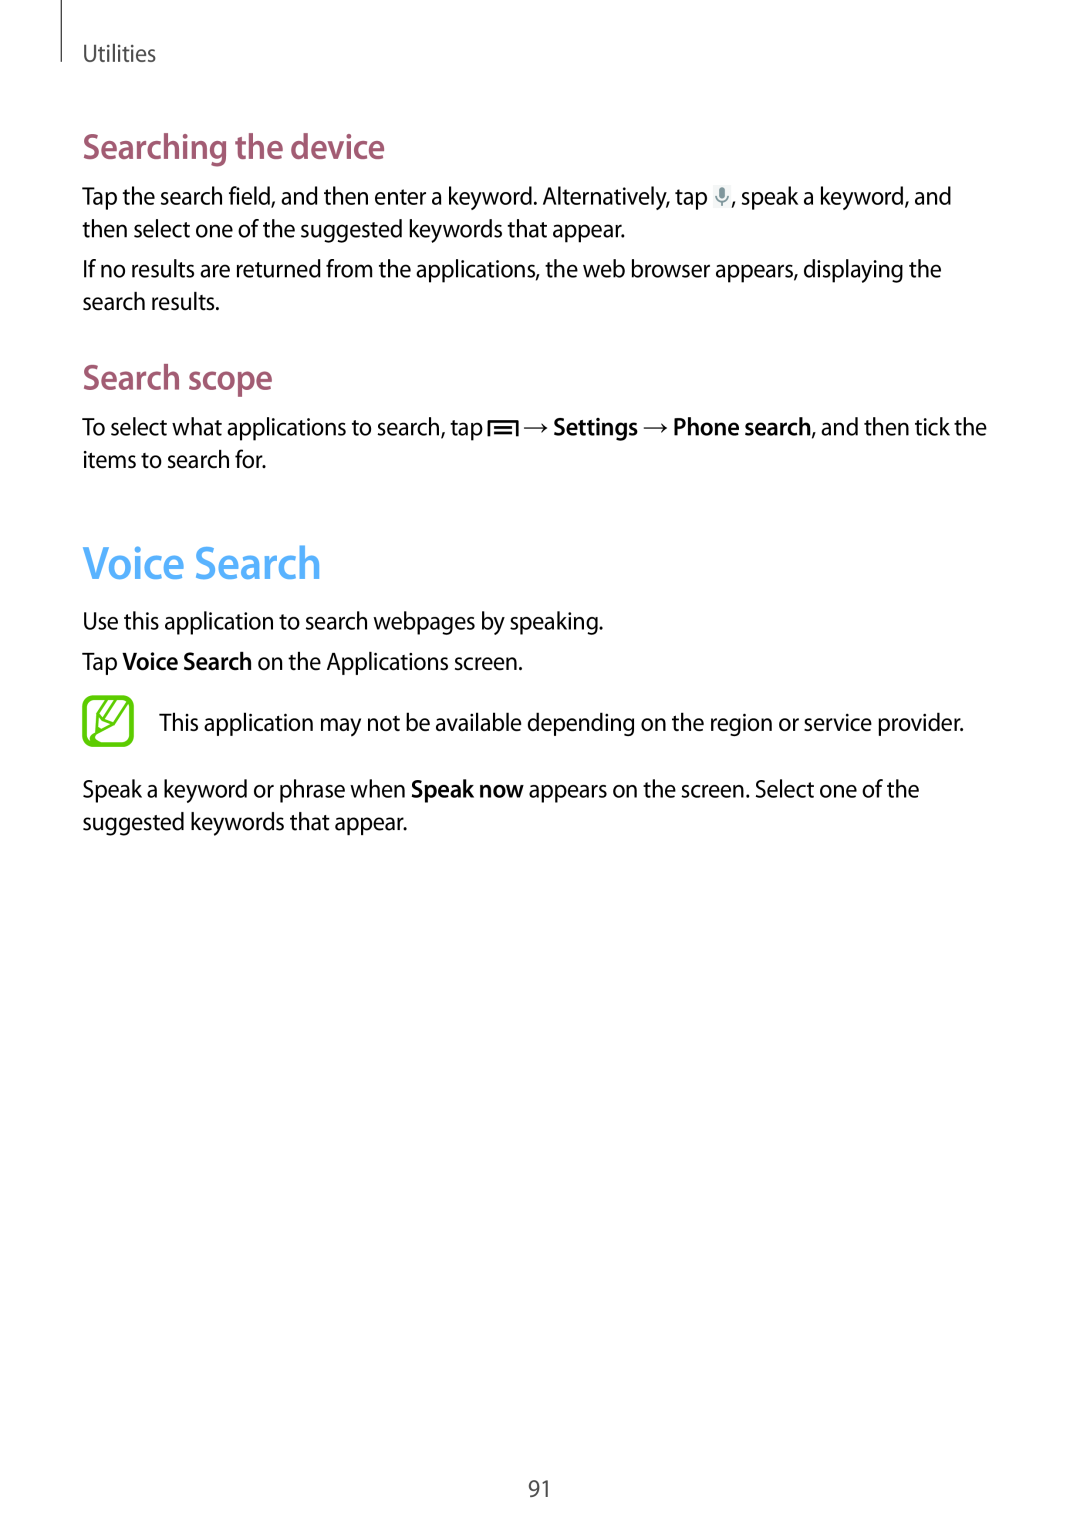 Samsung GT-I8190MBNOMN, GT-I8190RWNDTM, GT-I8190RWNDBT manual Voice Search, Searching the device, Search scope, Utilities 